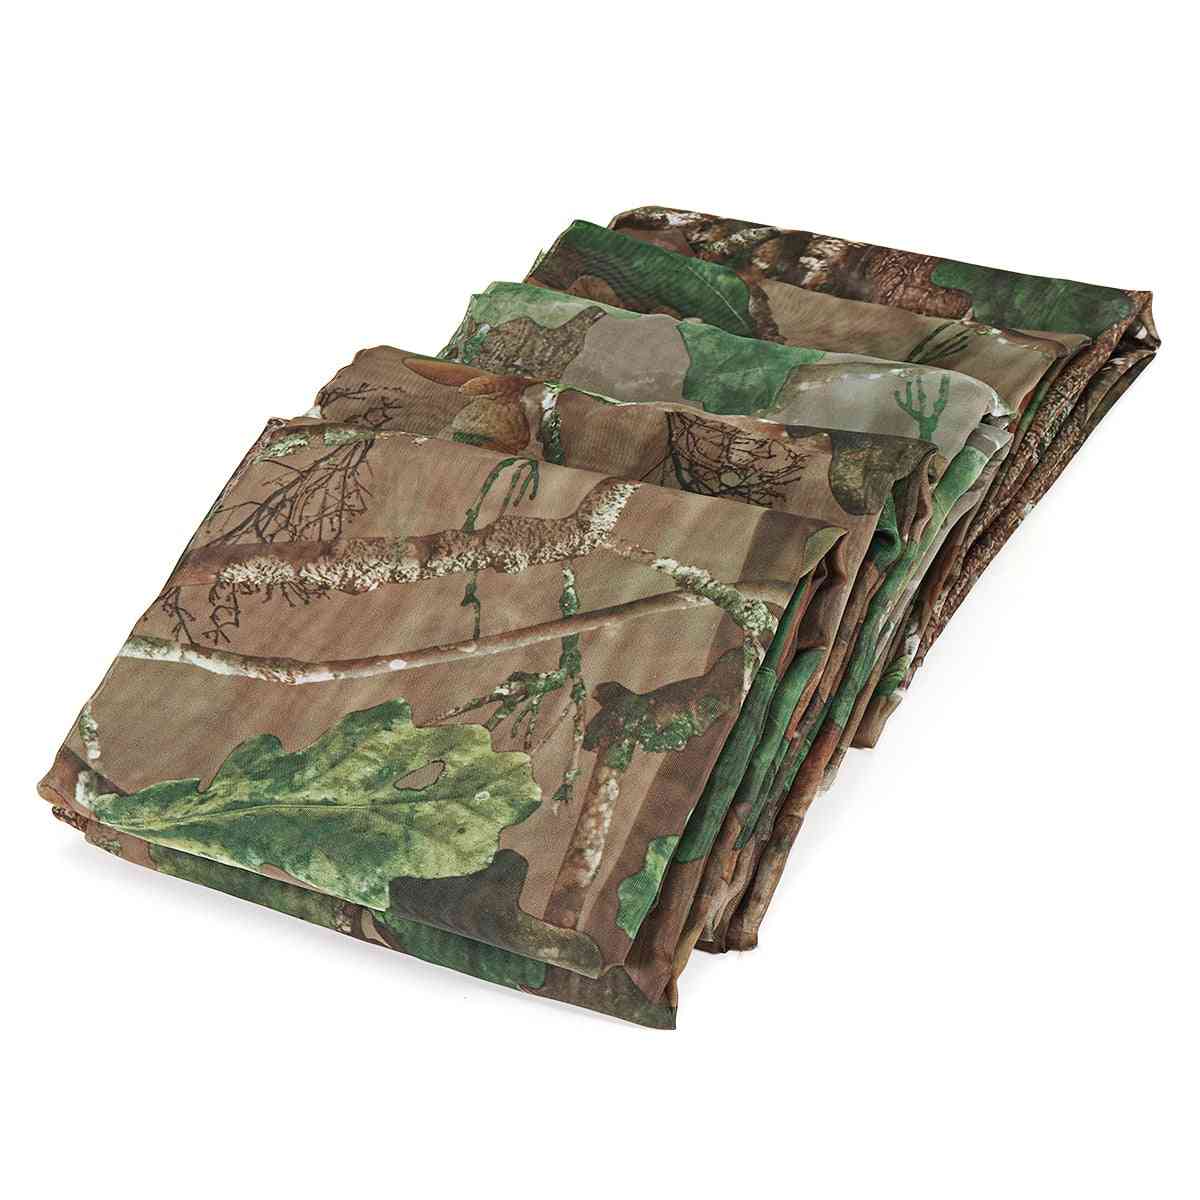 Multifunction Camo Hide Net For Decoy Hunting, Camping And Military Use